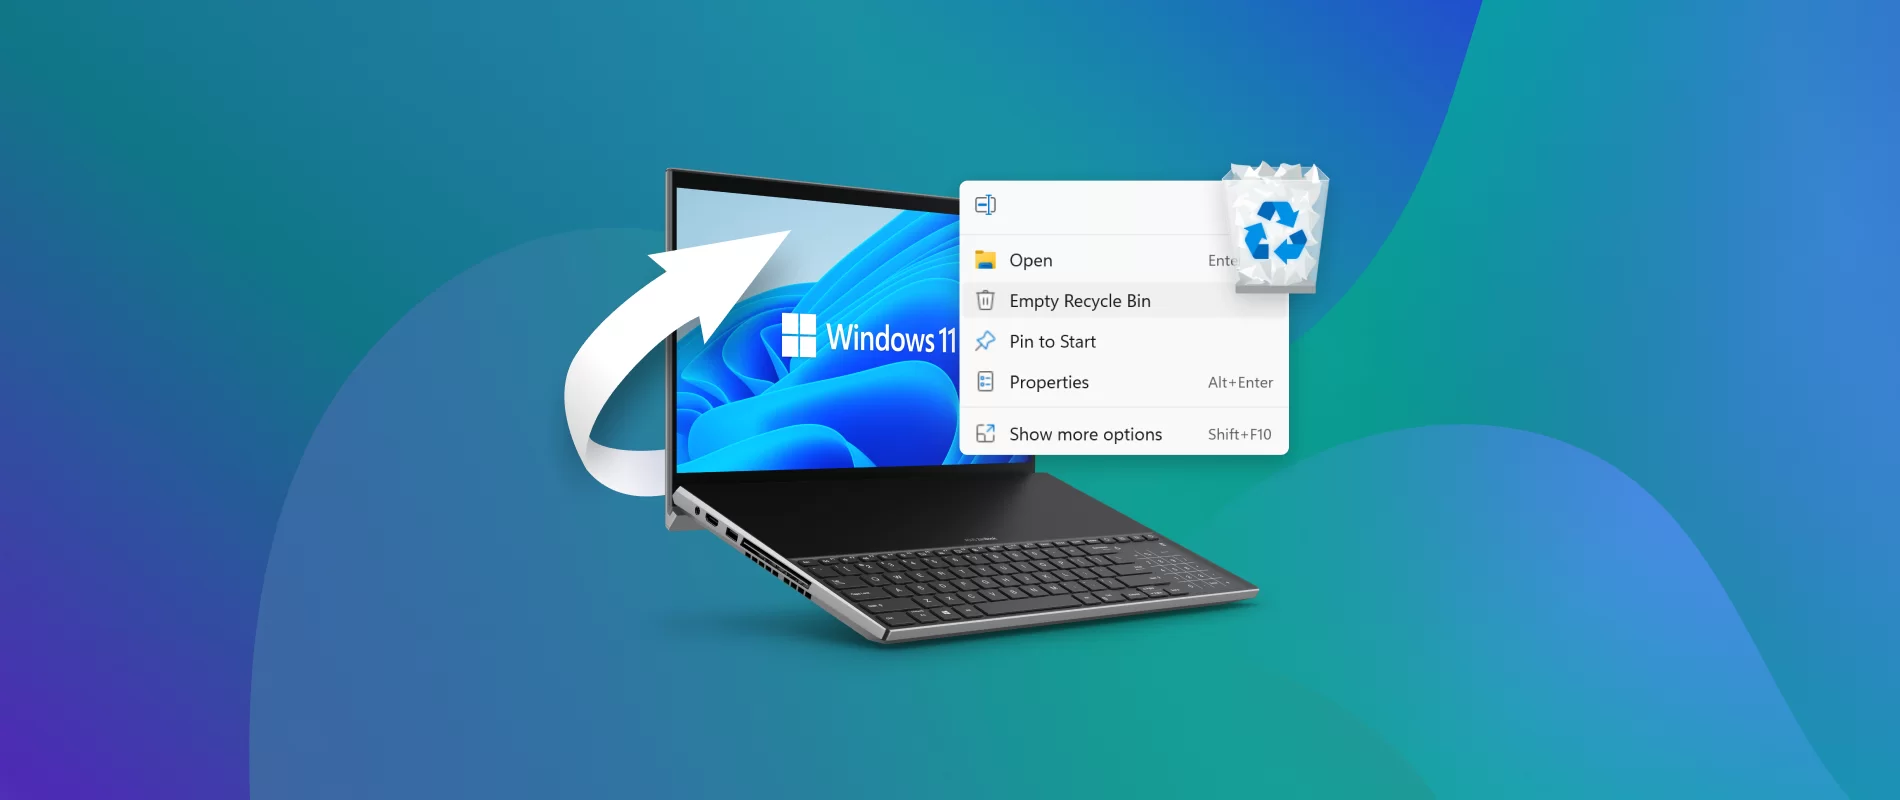 How to Recover Lost Data from Your Computer